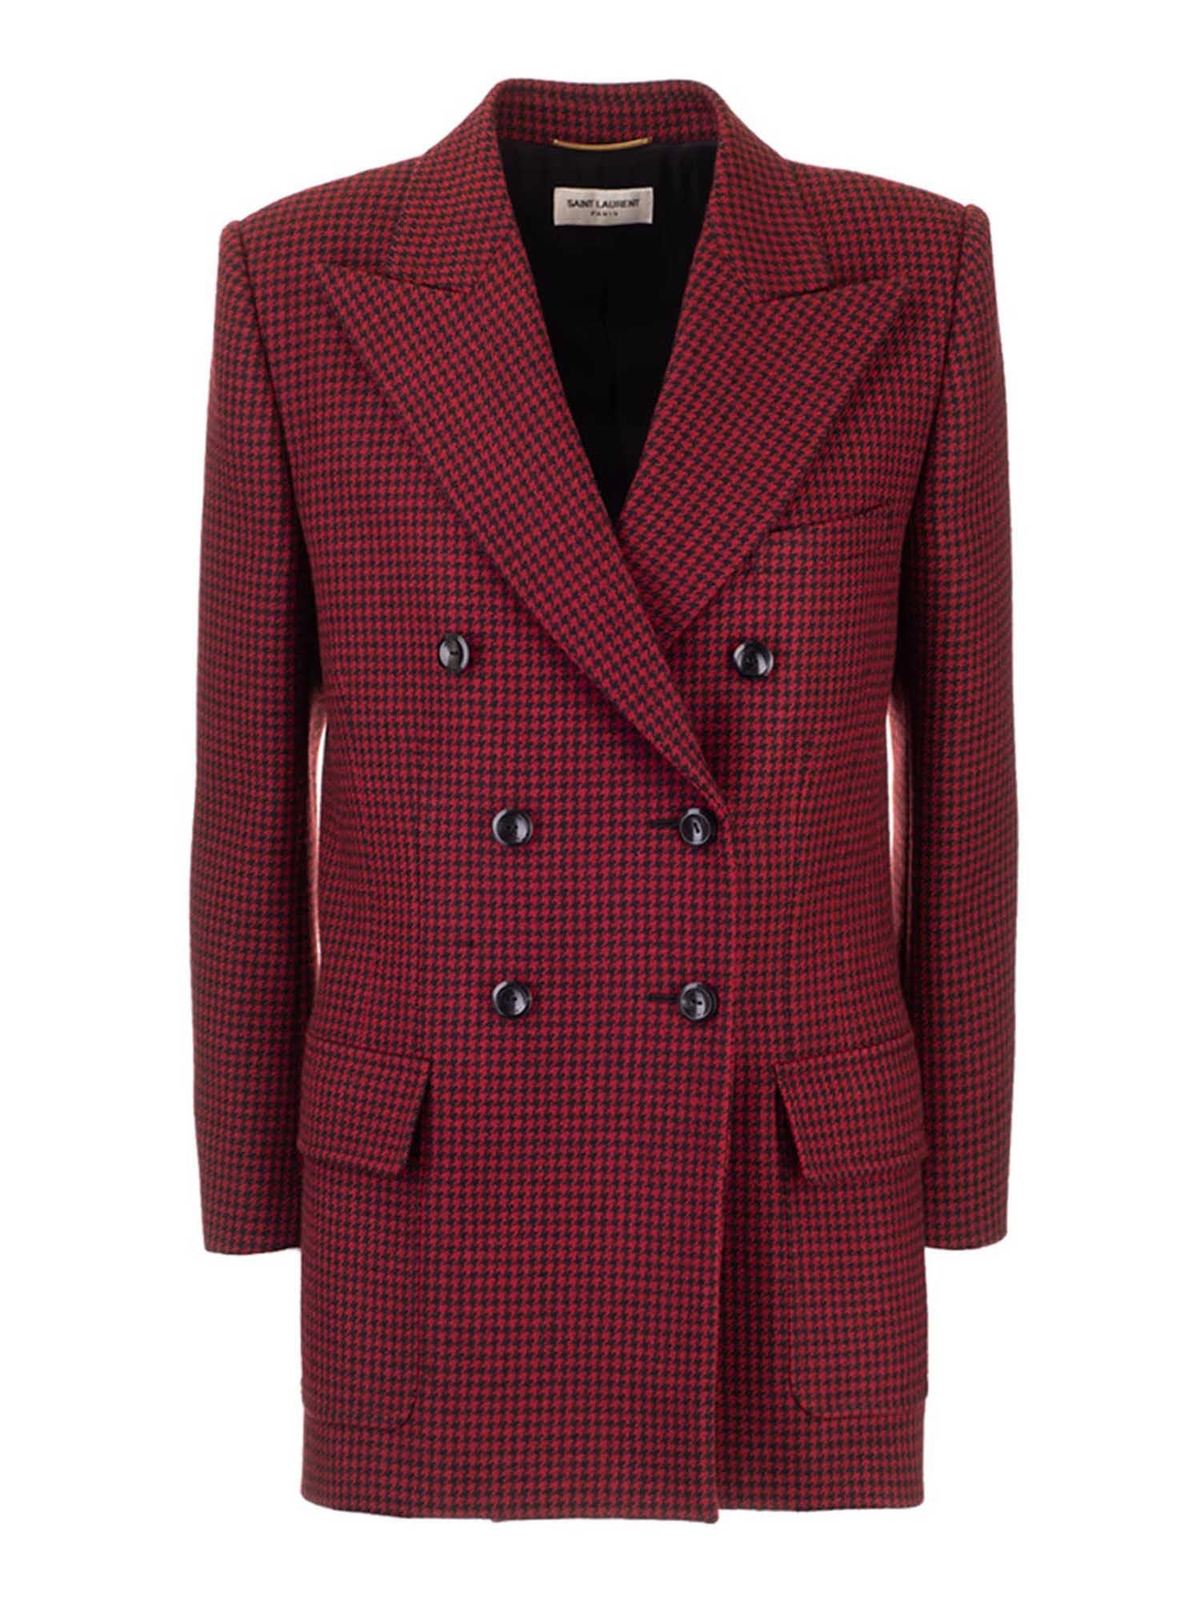 Casual jackets Saint Laurent - Double-breasted houndstooth jacket ...